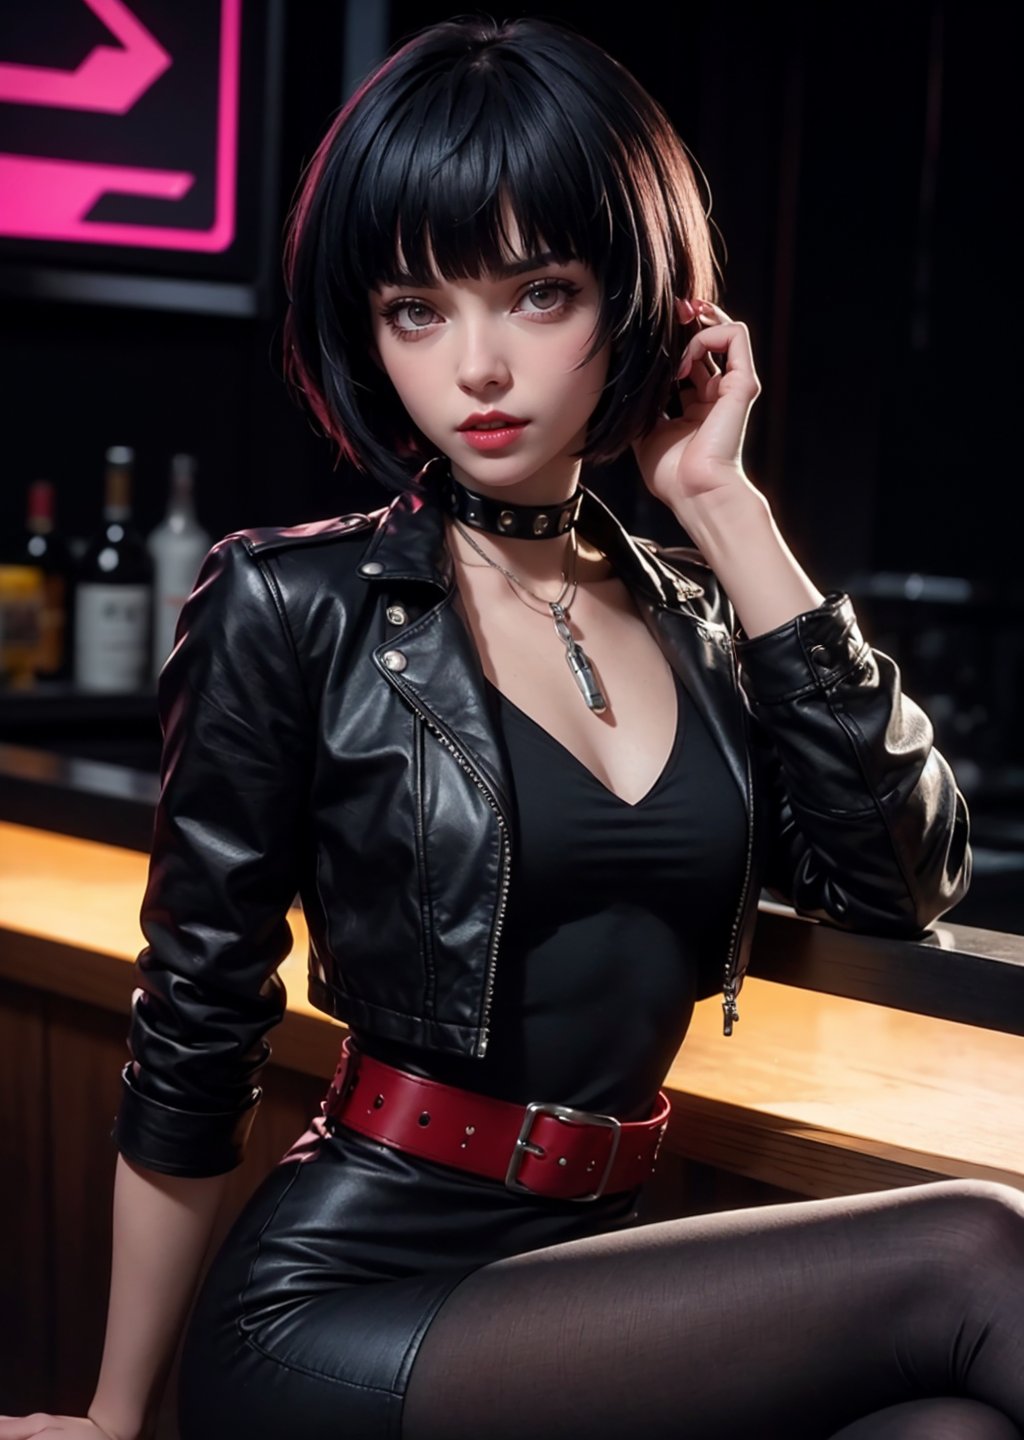 masterpiece, best quality, (detailed background), (beautiful detailed face, beautiful detailed eyes), absurdres, highres, ultra detailed, masterpiece, best quality, detailed eyes, upper body, 1_girl, cyberpunk scene, Tae Takemi, Persona 5 game, blue dark hair, pink lips, punkrock clothes, neck bone, messy bob cut, blunt bangs, brown eyes, red nails polish, short blue dress, black ripped leggings, short black jacket, red grommet belt, choker, midnight, at a bar background, sexy pose, erotic pose, alluring pose, mouth open, kinky, close-fitting clothing, undressing, arms_crossed, arms_folded, crossed_legs_(sitting)